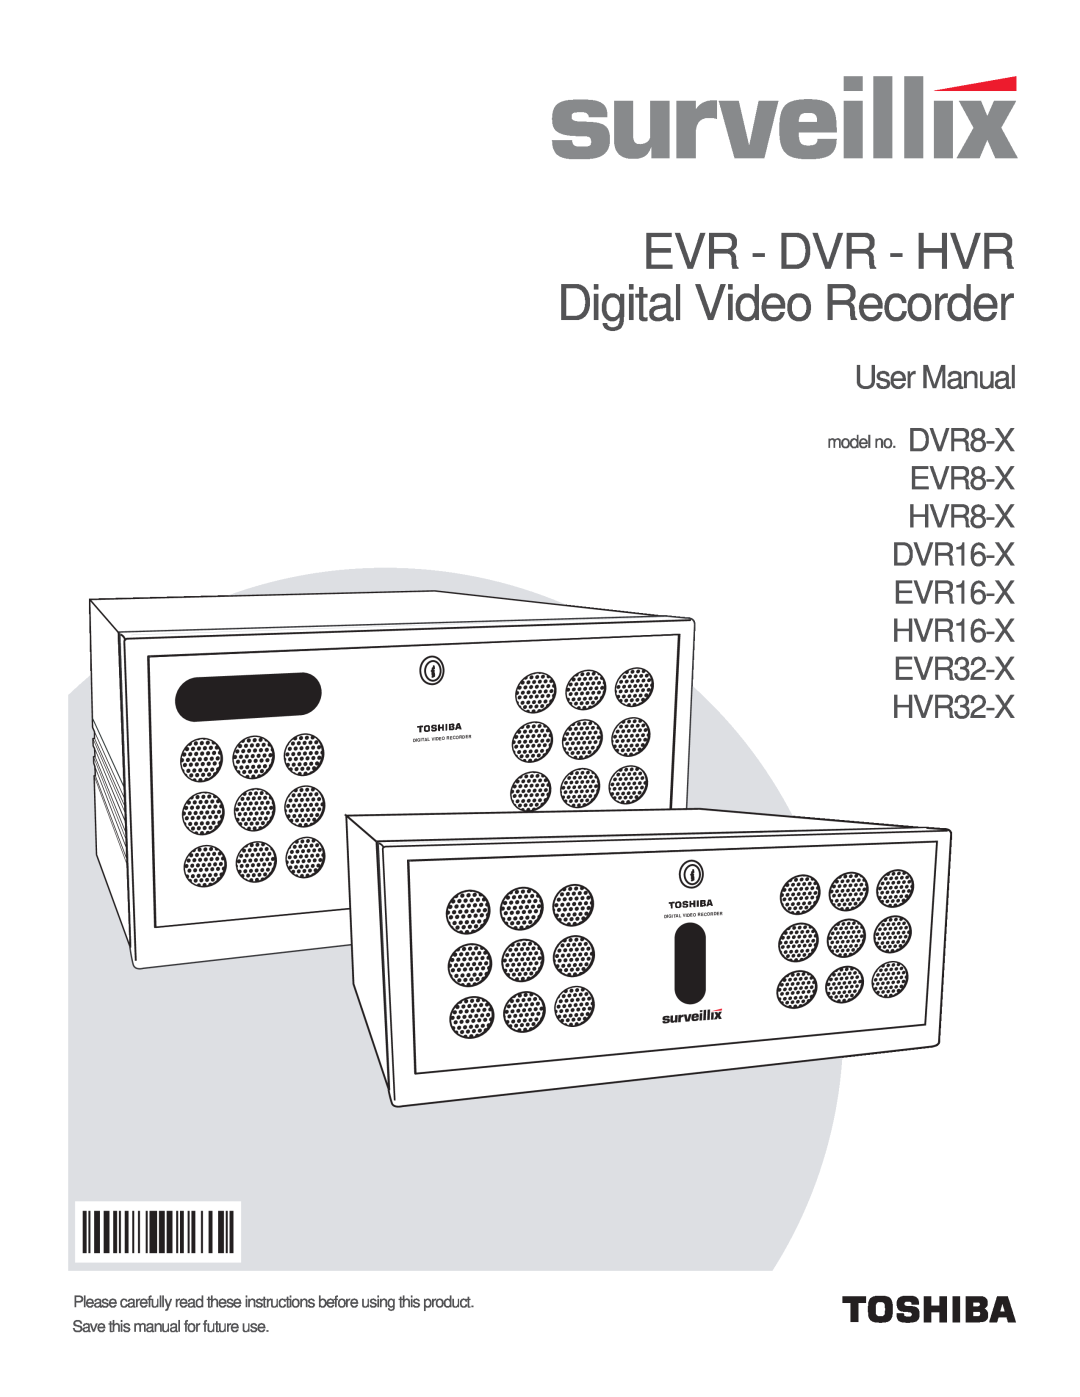 Toshiba EVR32-X, EVR8-X user manual EVR - DVR - HVR Digital Video Recorder, HVR32-X, Save this manual for future use 